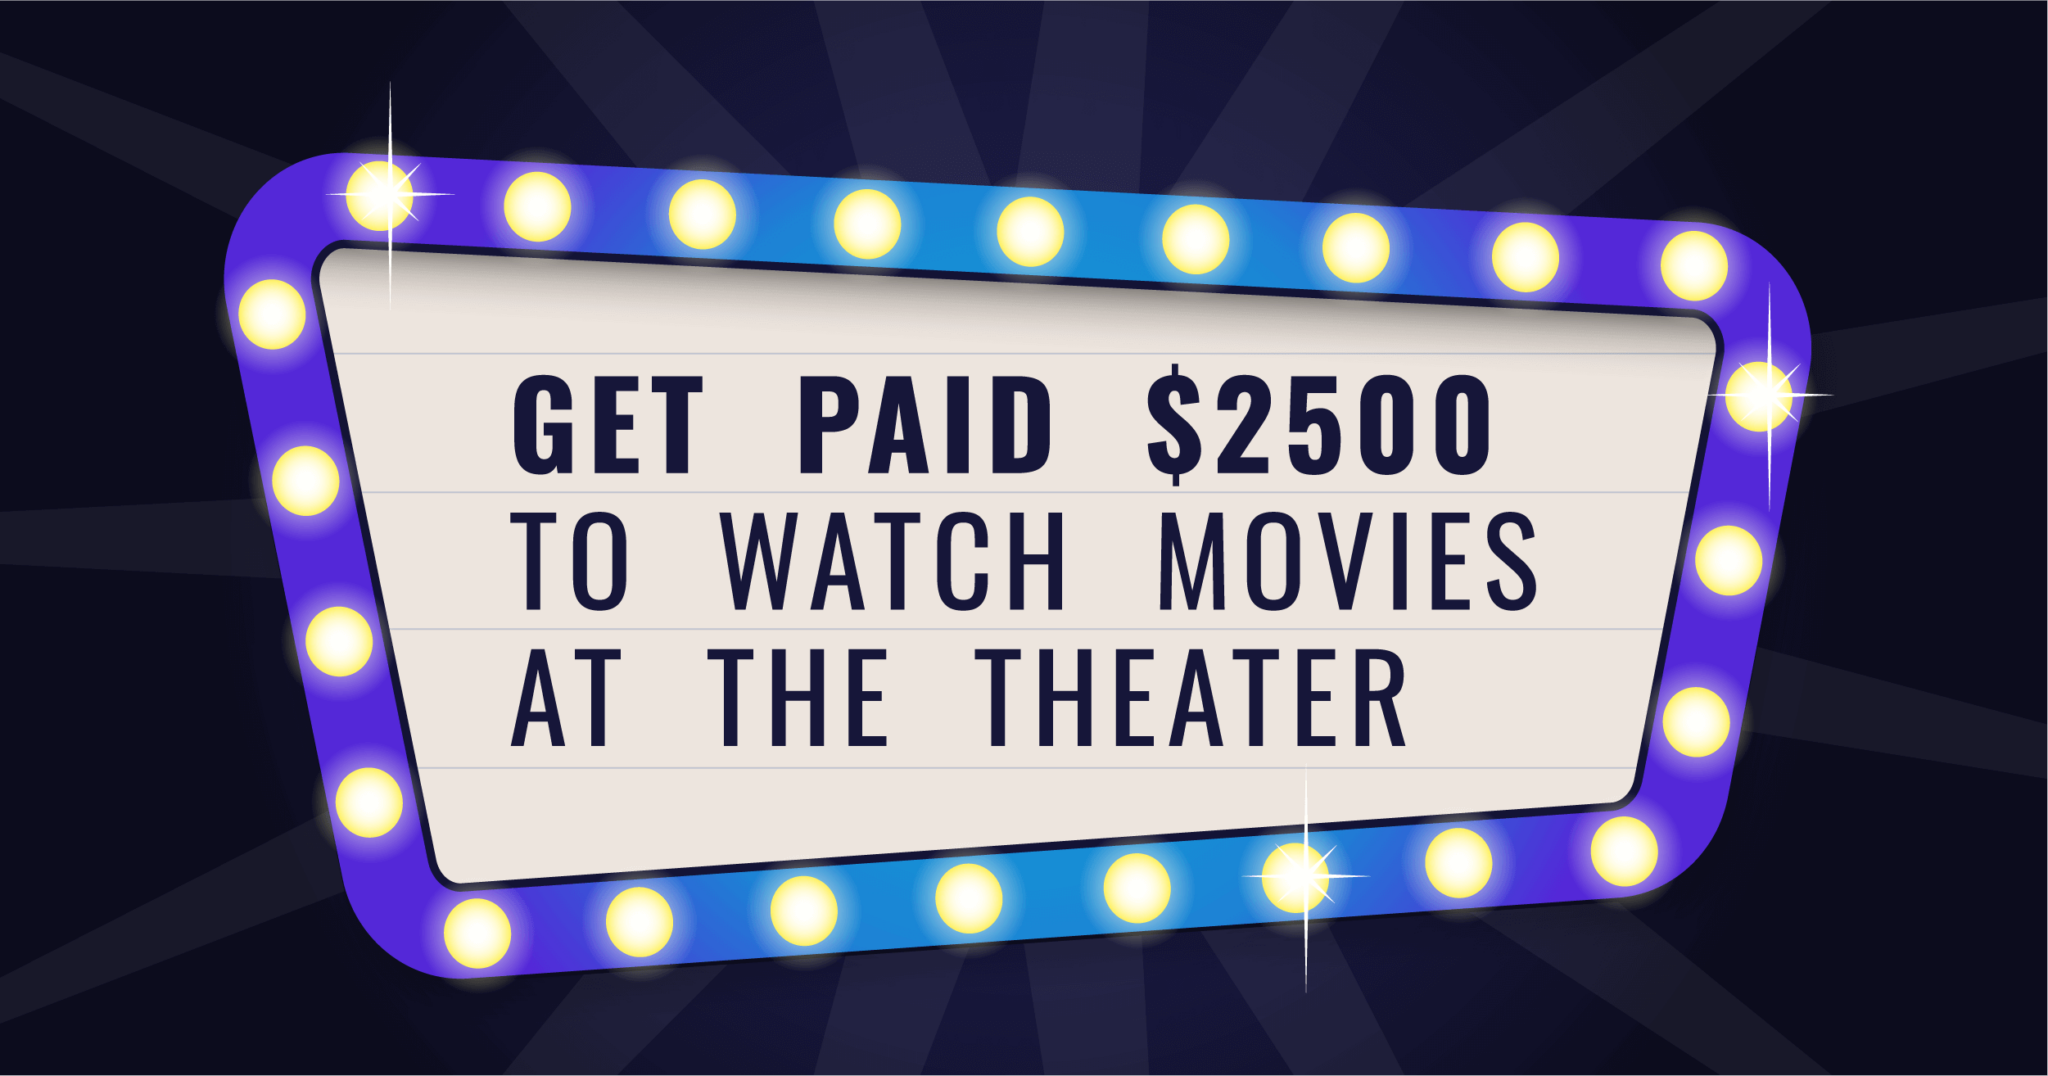 Get paid $2500 to watch movies